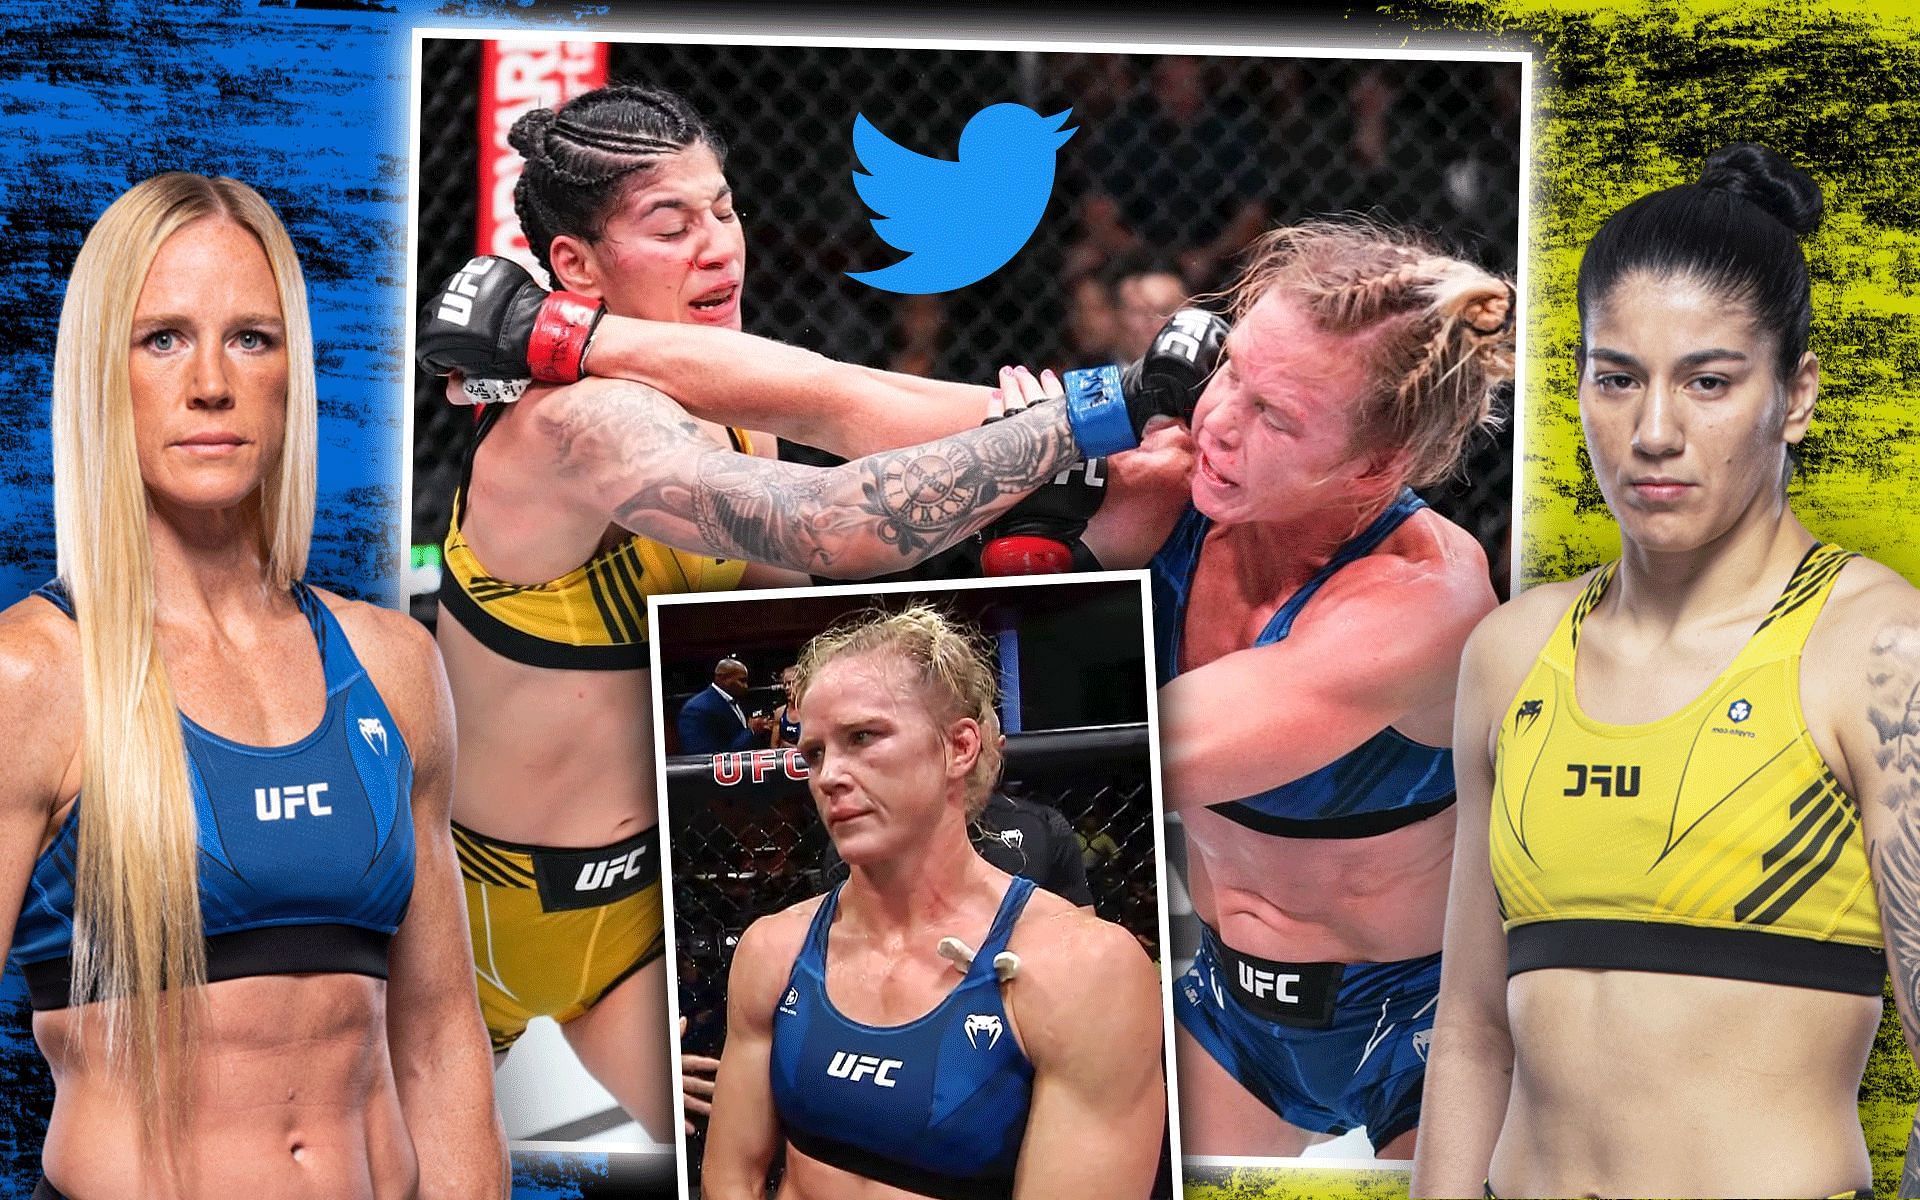 Twitter uproar after Holly Holm (left) drops split decision to Ketlen Vieira (right) [Image credits: ufc.com and @ufc on Twitter]